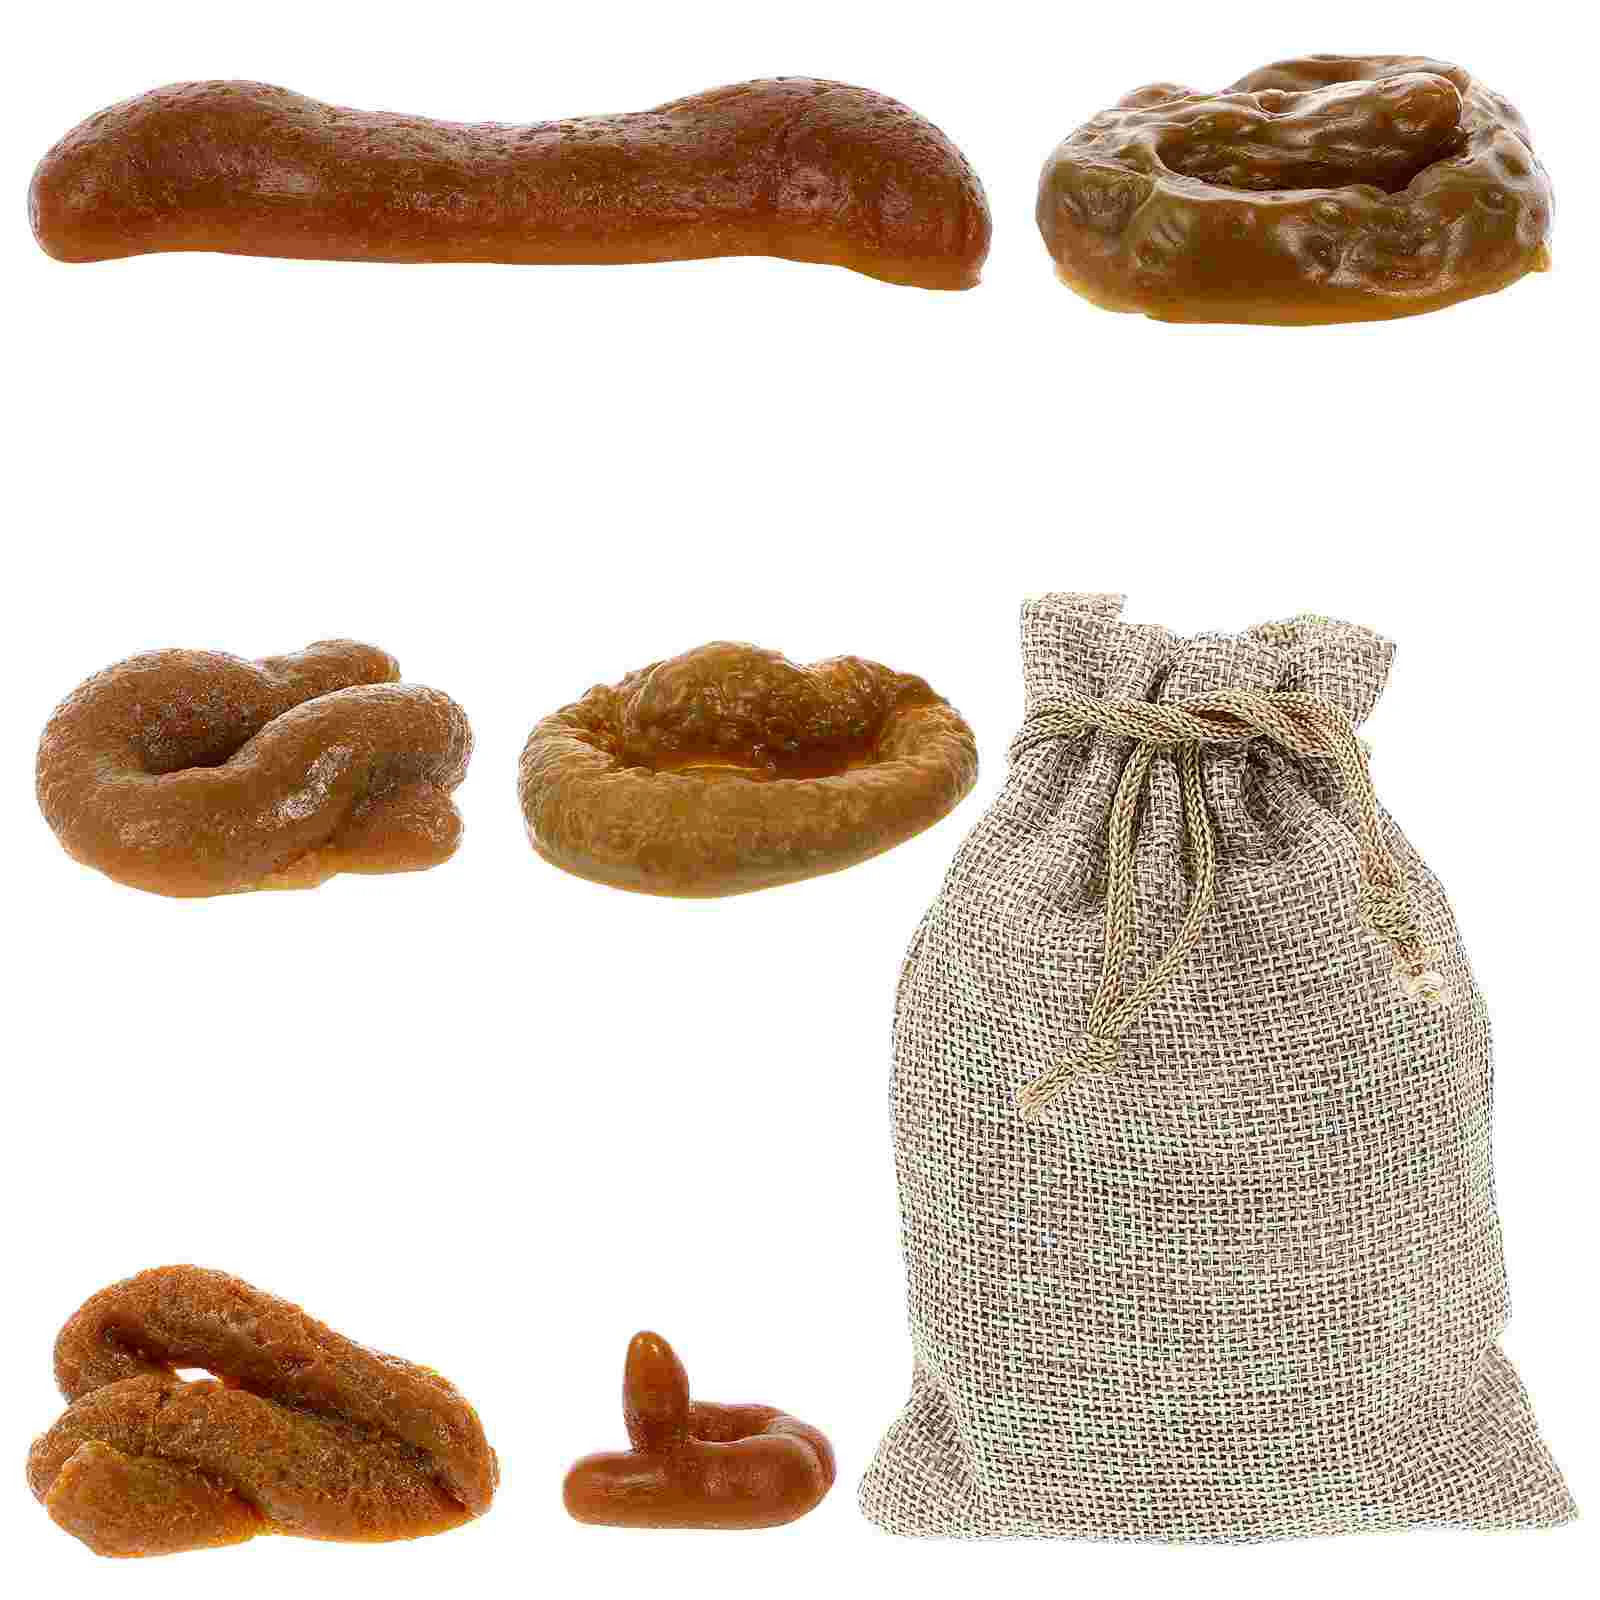 

Poop Fake Prank Toy Poo Toys Pranks Dog Fools April Fart Spray Daybomb Trickyimitation Real Prop Stuff Funny Novelty Props Gags